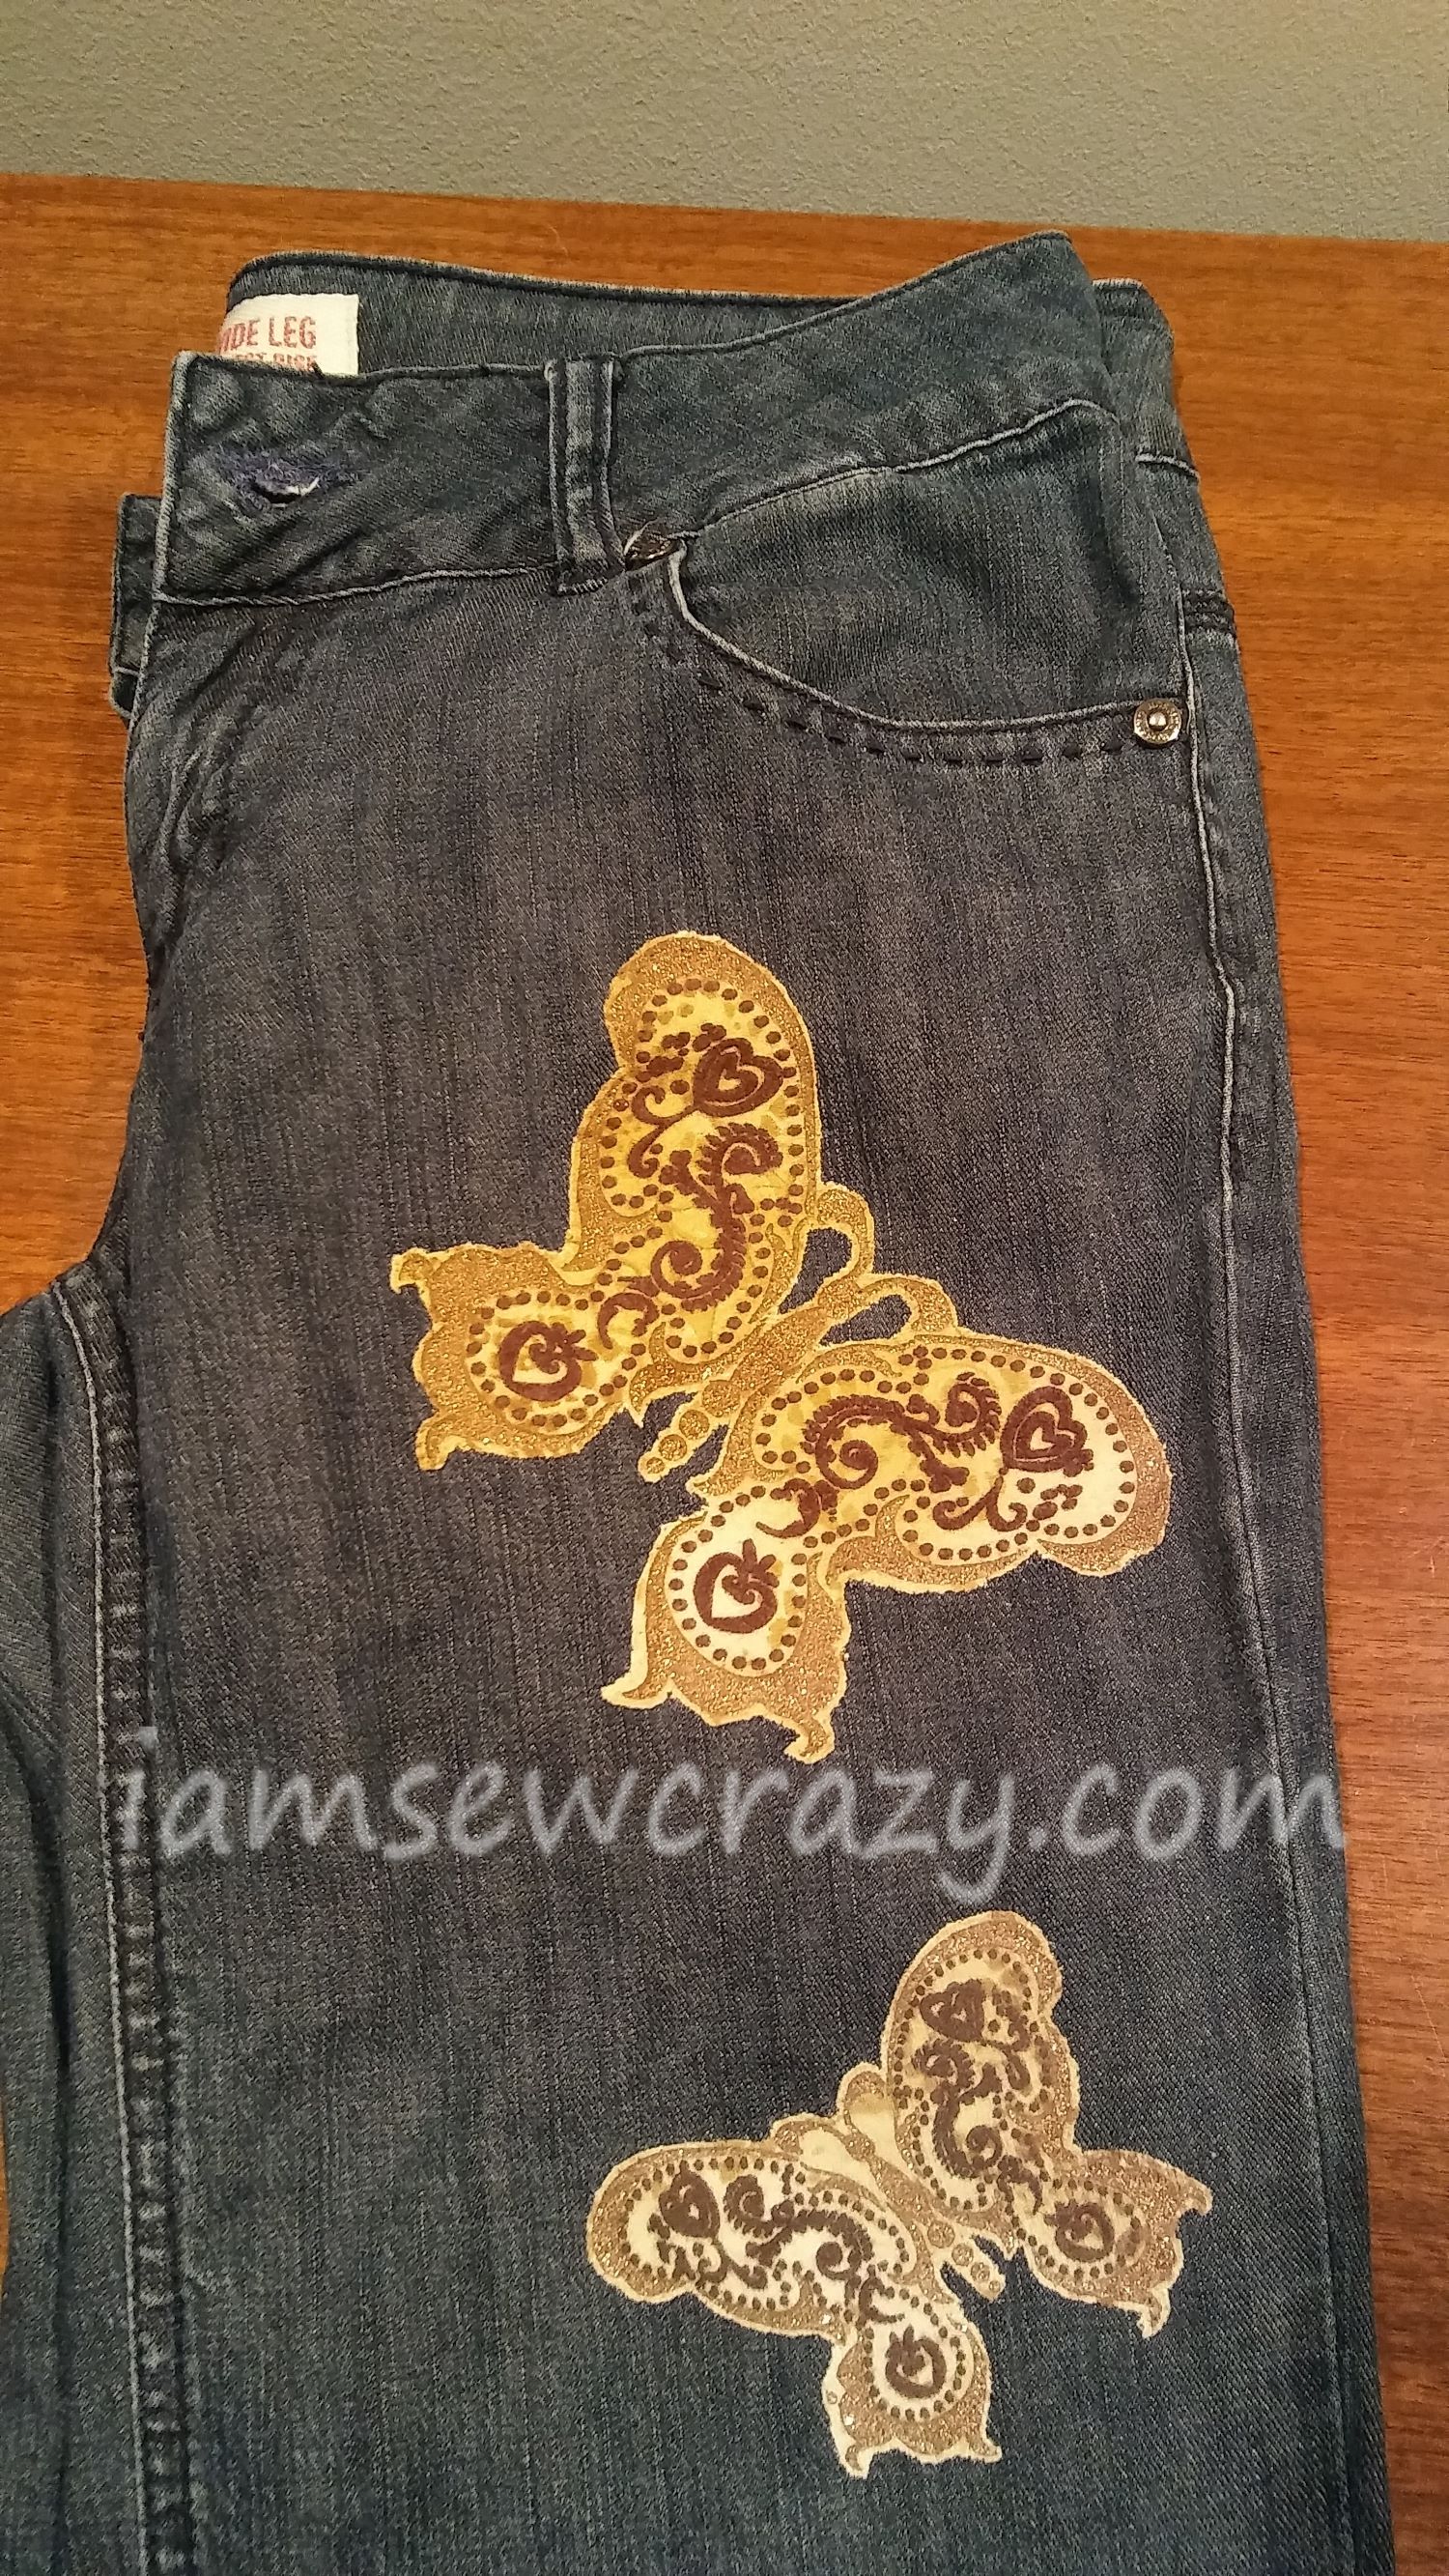 sewing patches on jeans